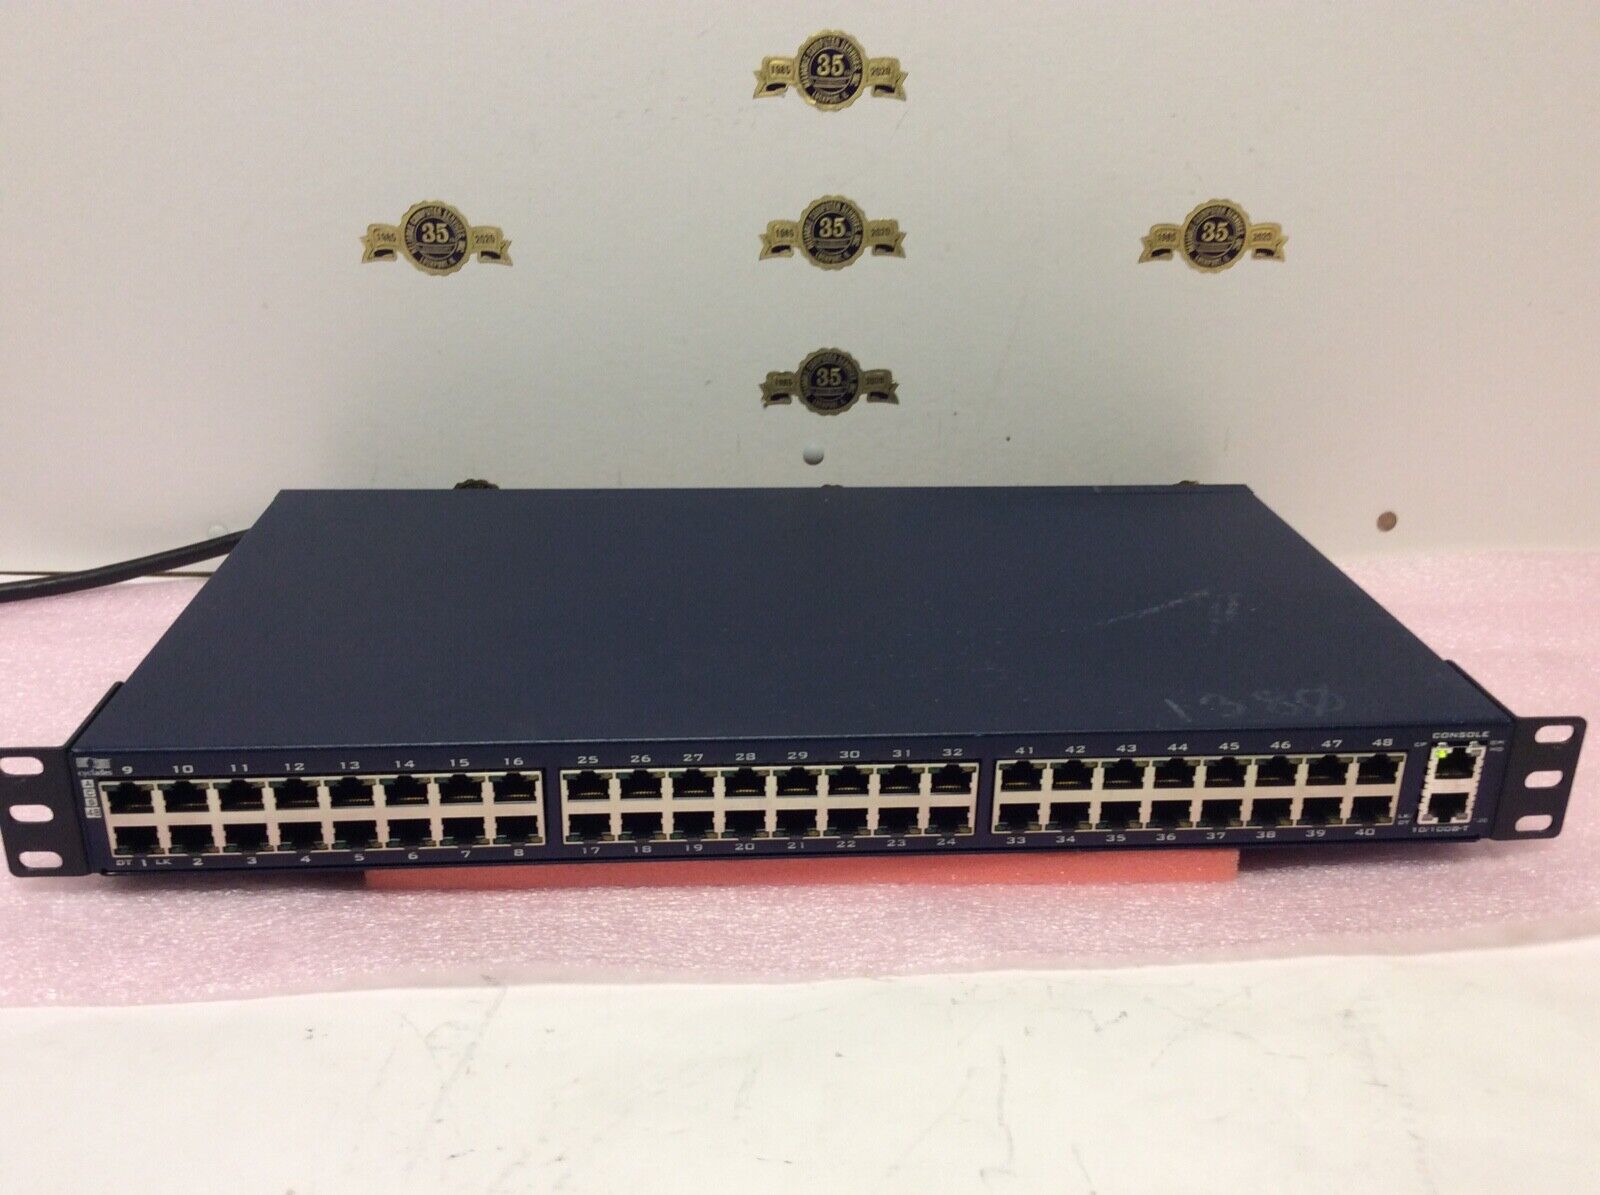 Avocent Cyclades Alterpath ACS48 48 port Advanced Console Server